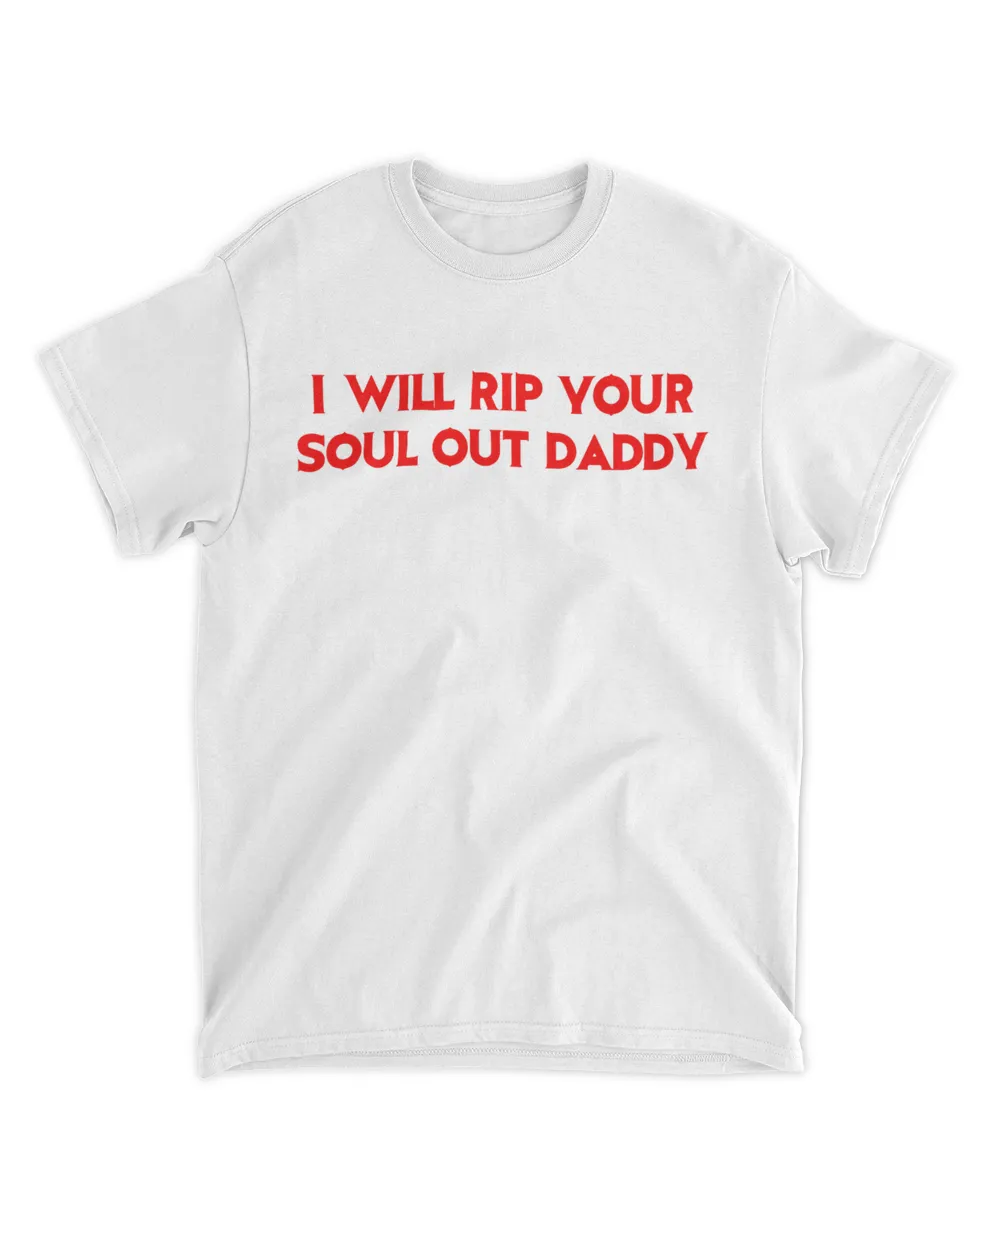 I Will Rip Your Soul Out Daddy Shirt